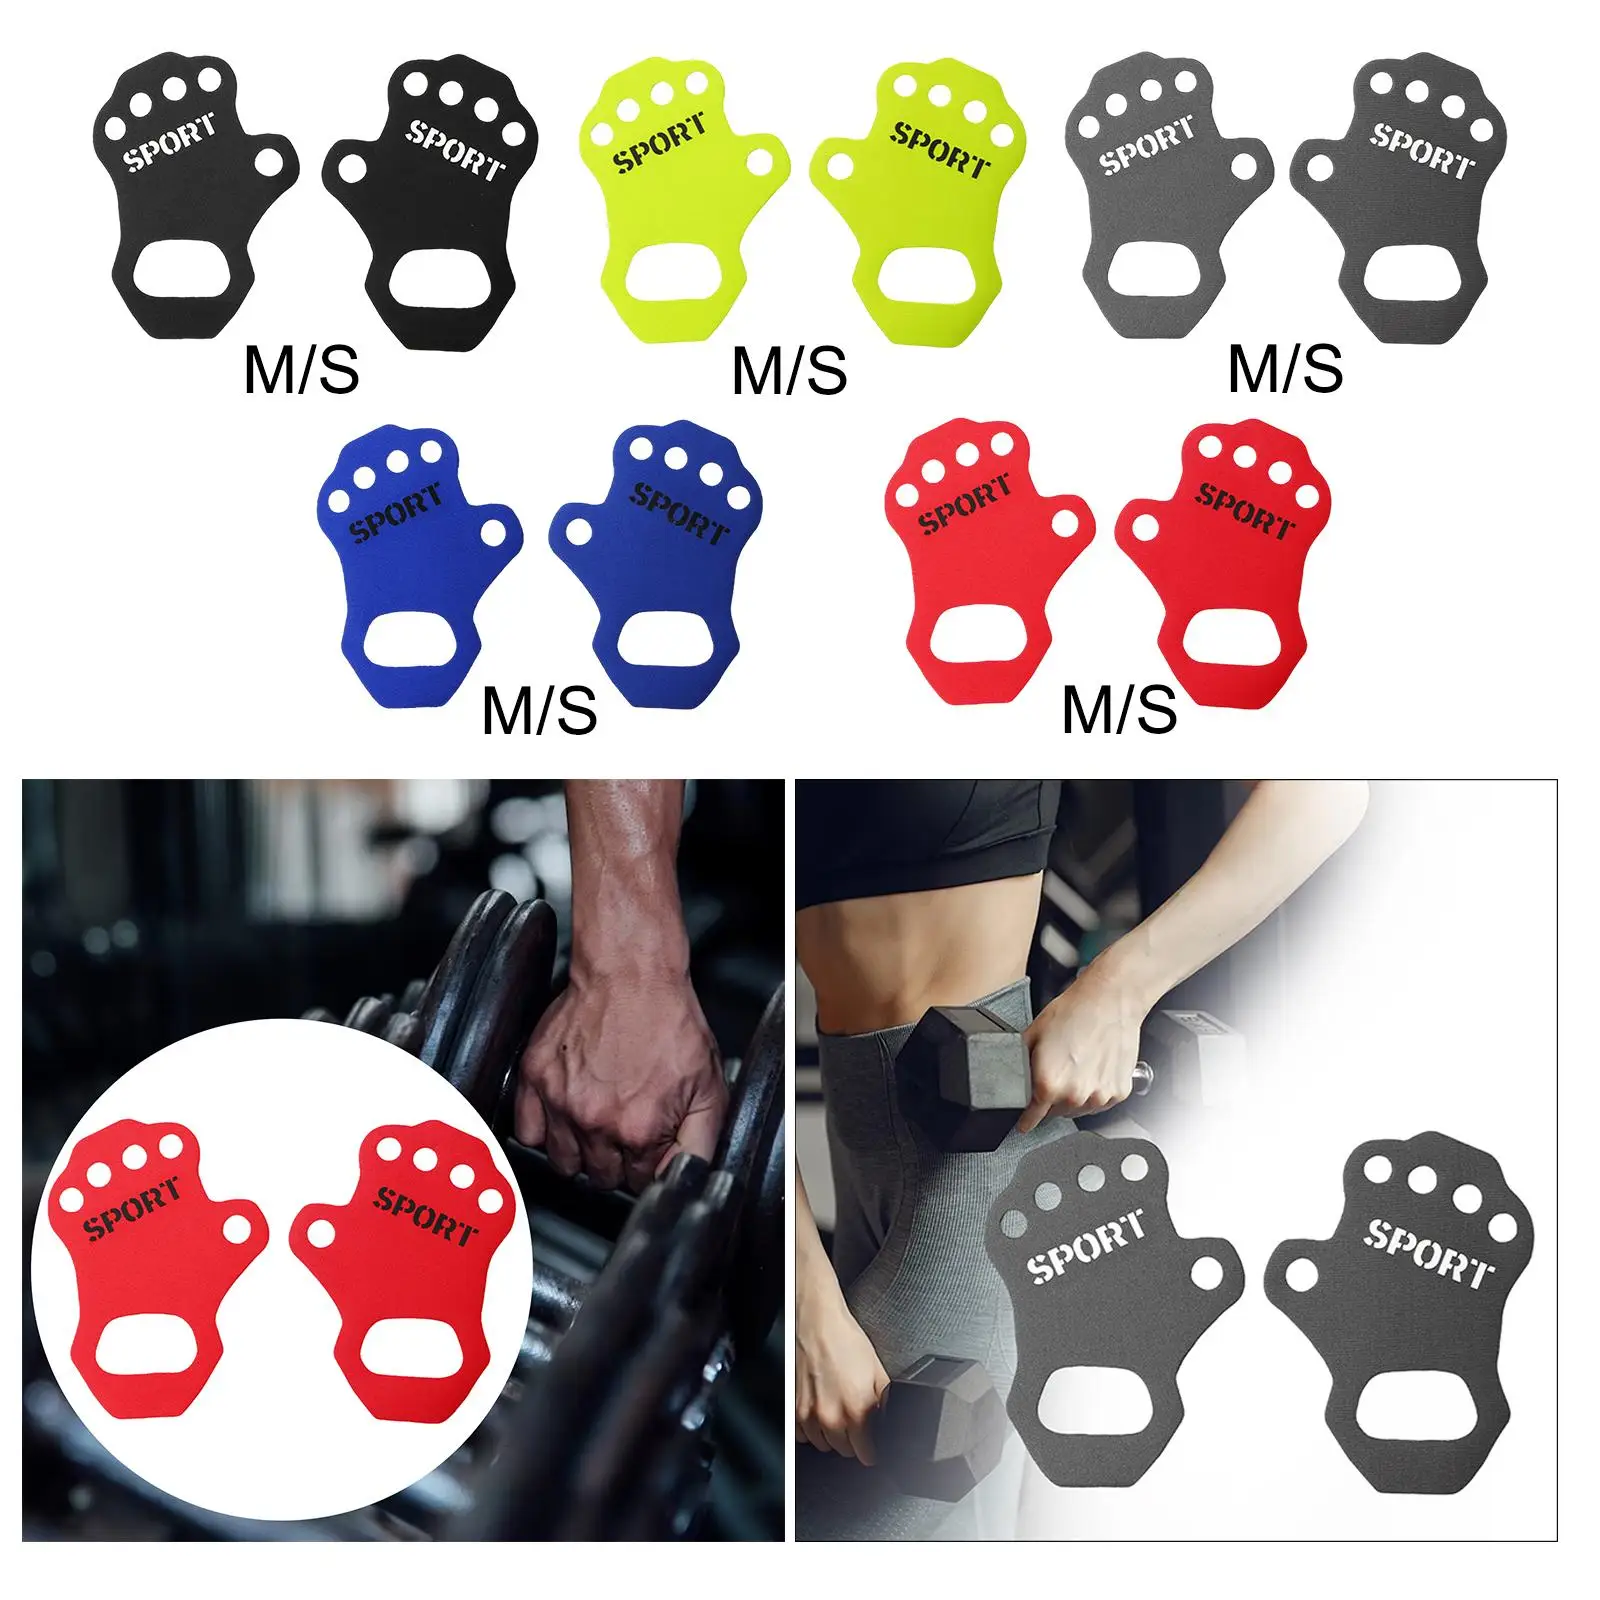 Workout Gloves Pads Glove Hand Grips Durable Weightlifting Grip Pads for Men Women Yoga Grips Pull Ups Strength Training